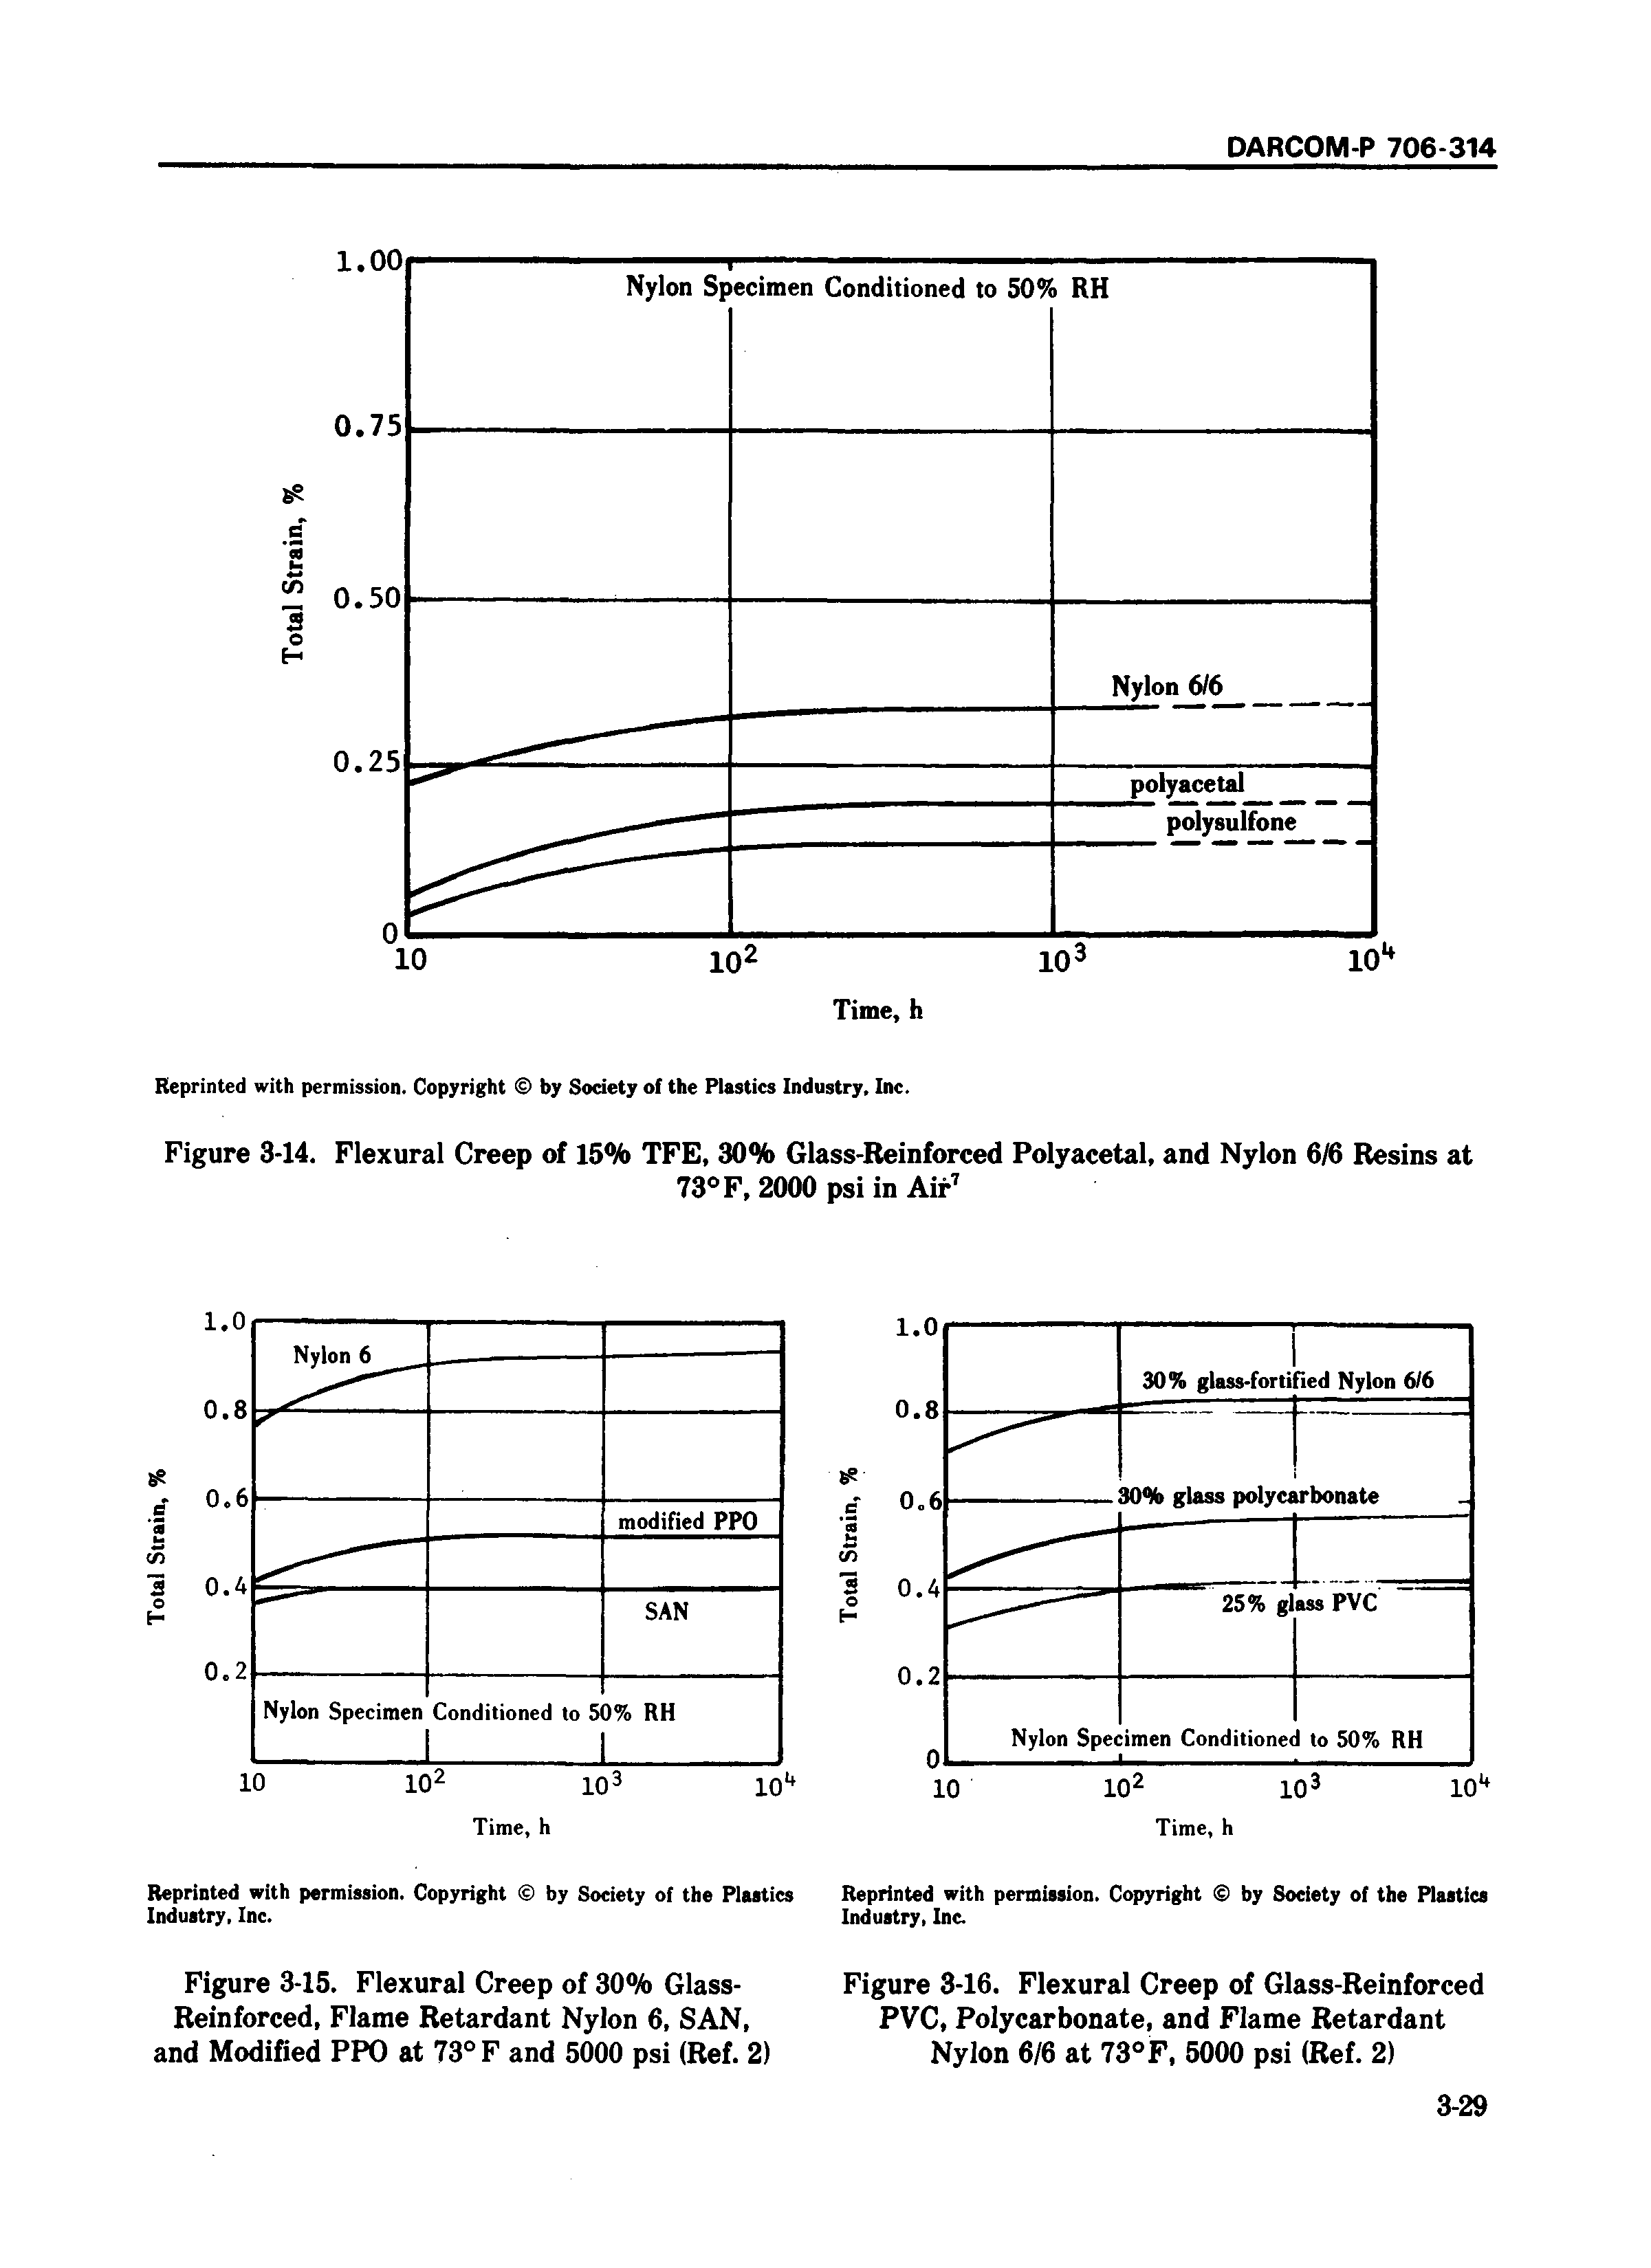 Figure 3-16. Flexural Creep of Glass-Reinforced PVC, Polycarbonate, and Flame Retardant Nylon 6/6 at 73°F. 5000 psi (Ref. 2)...